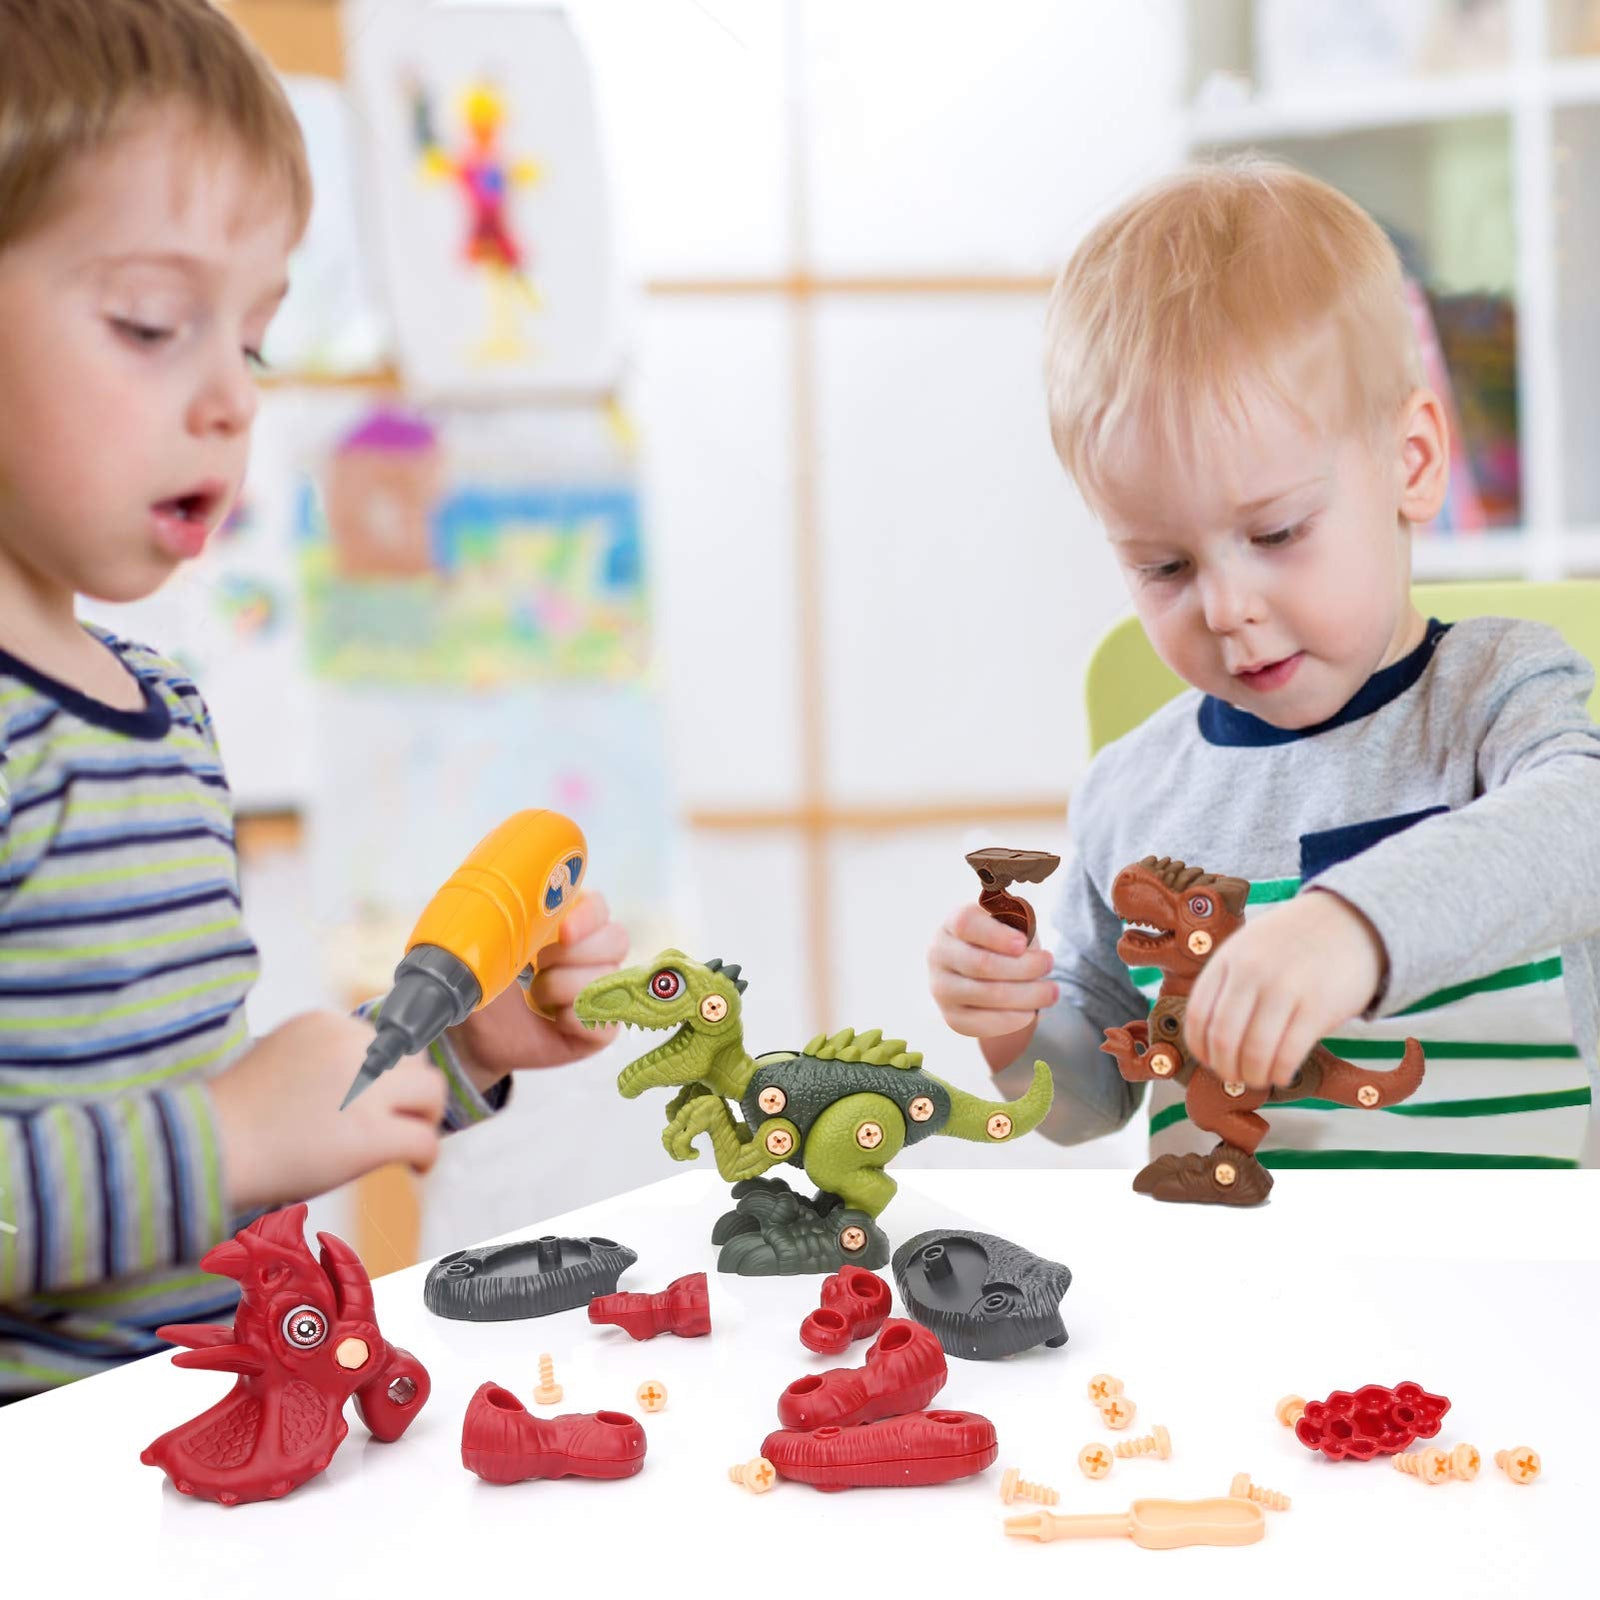 Sanlebi Toy for 4 5 6 Year Old Boys Take Apart Dinosaur Toys for Kids Building Toy Set with Electric Drill Construction Engineering Play Kit STEM Learning for Boys Girls Age 3 4 5 Year Old